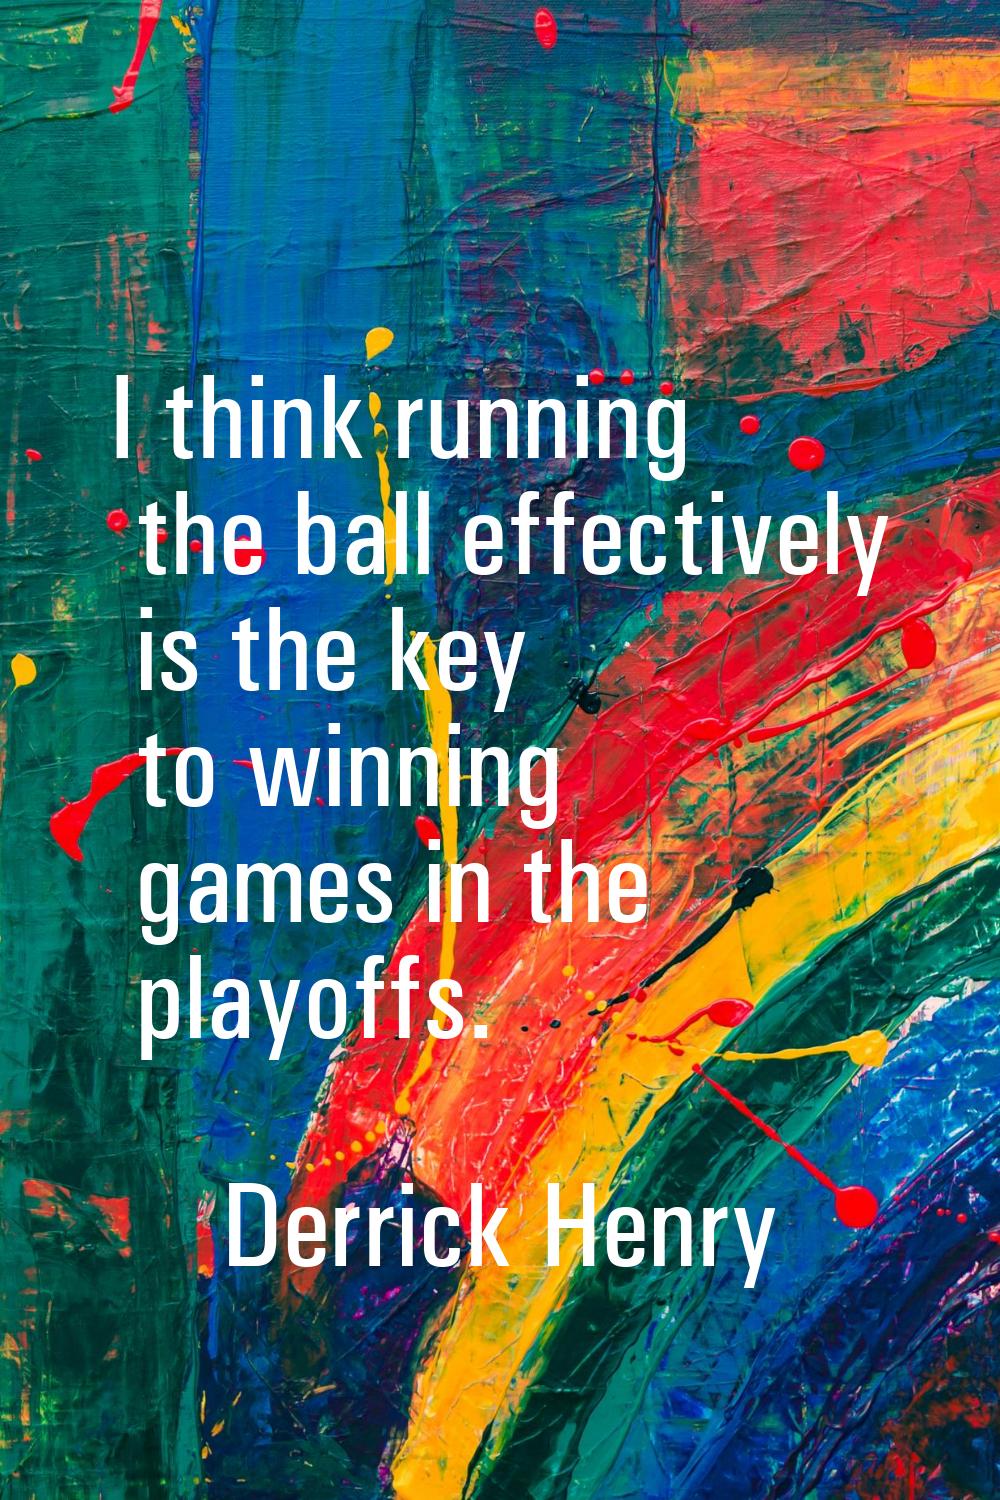 I think running the ball effectively is the key to winning games in the playoffs.